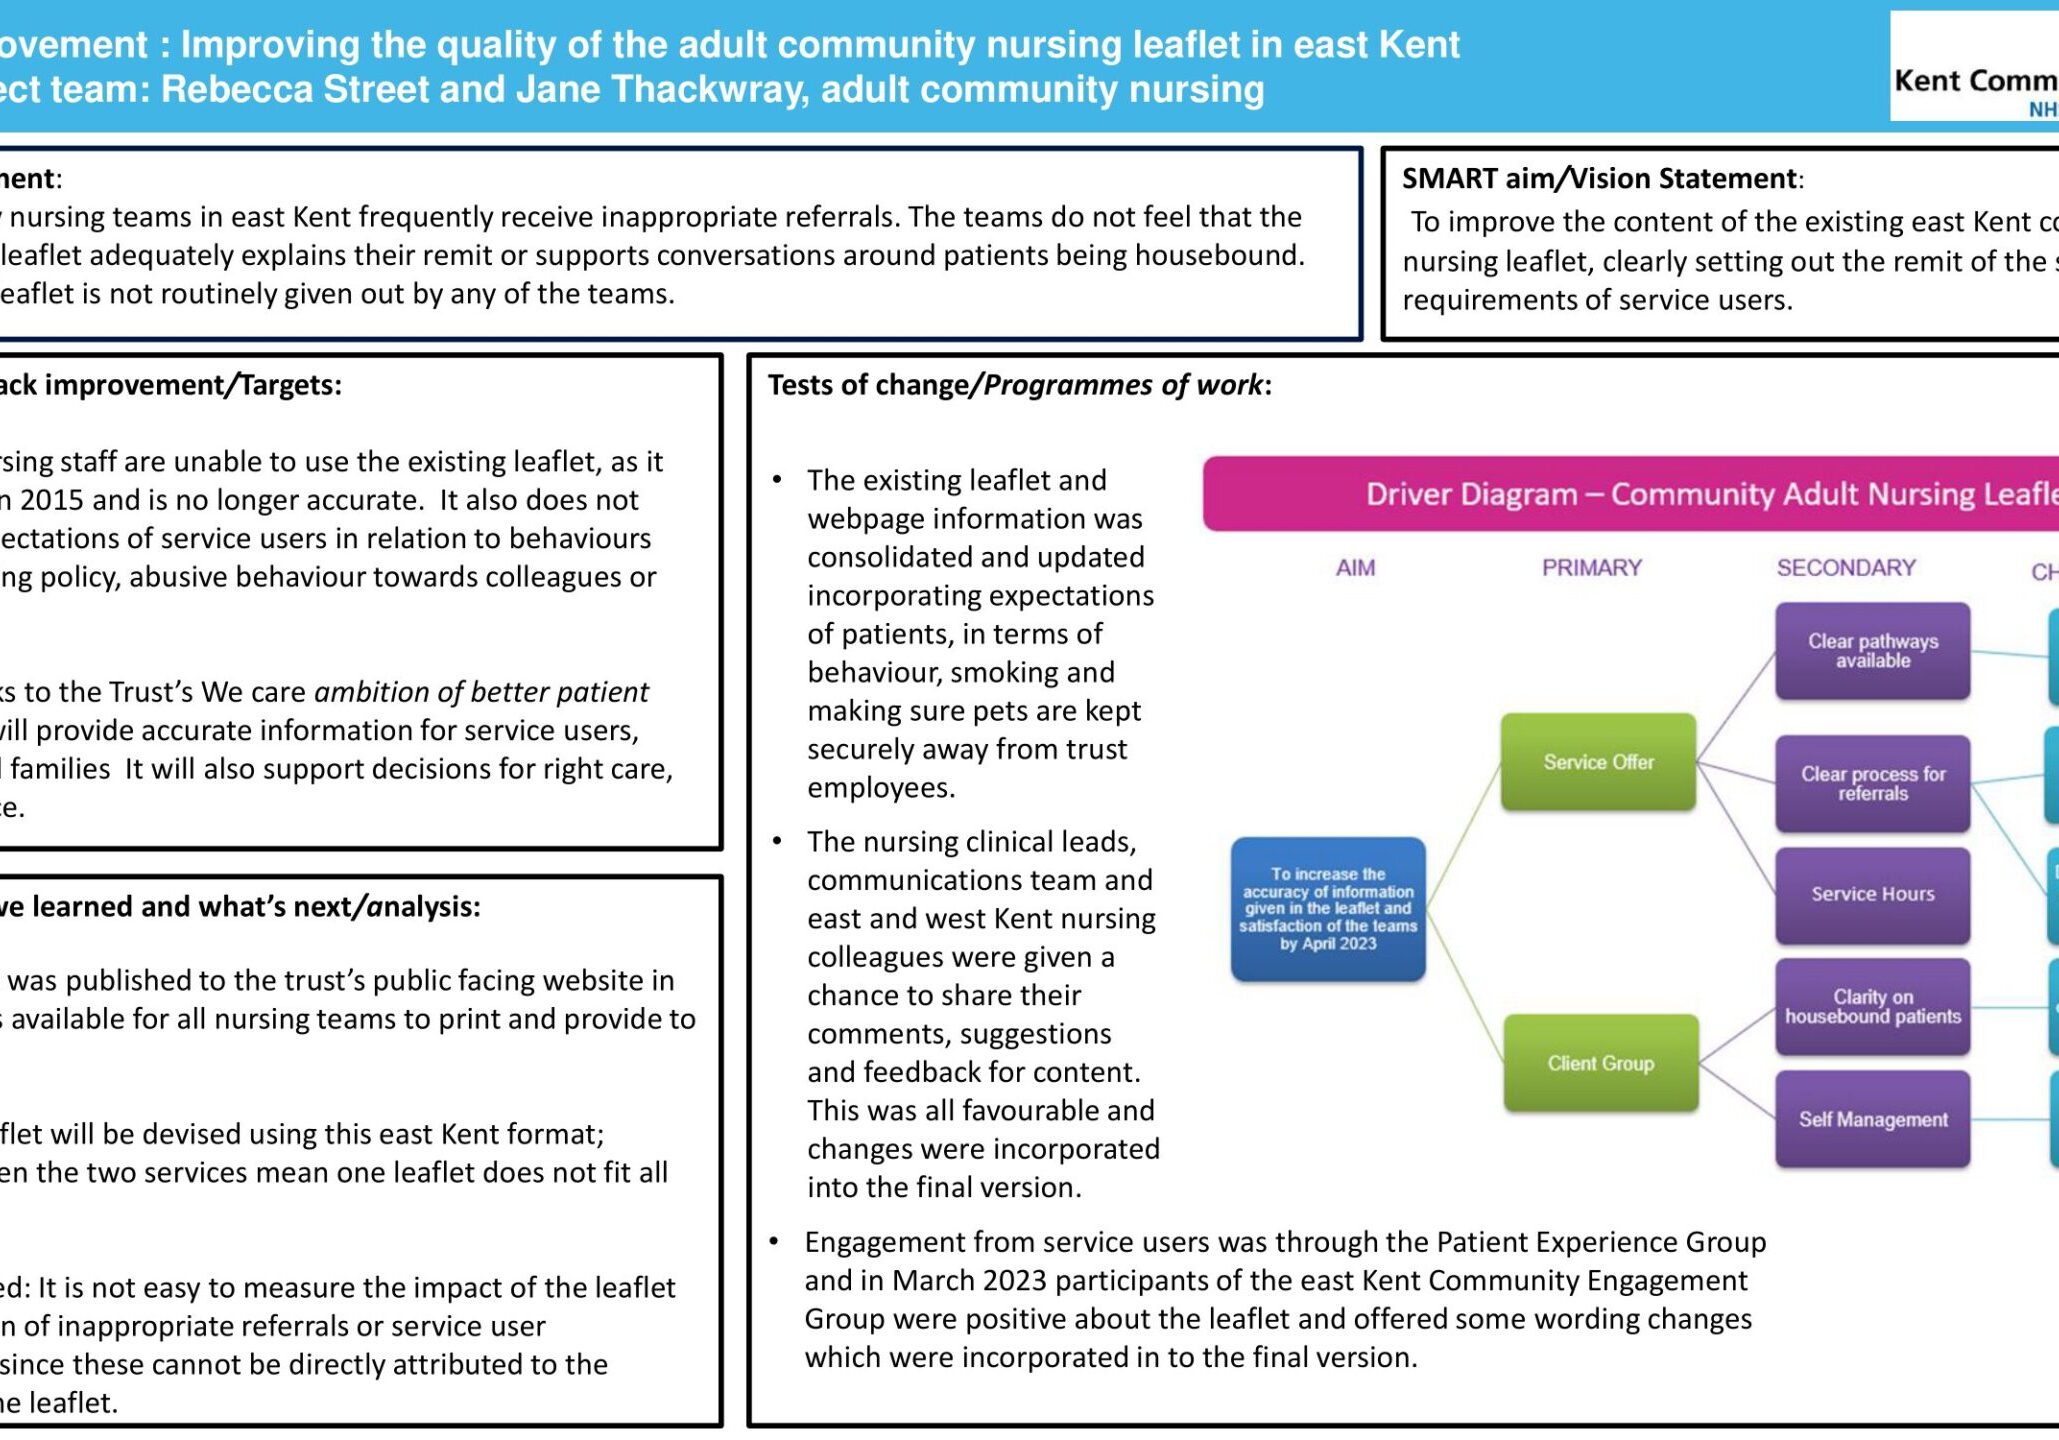 Improving a patient leaflet given out by community nursing in east Kent